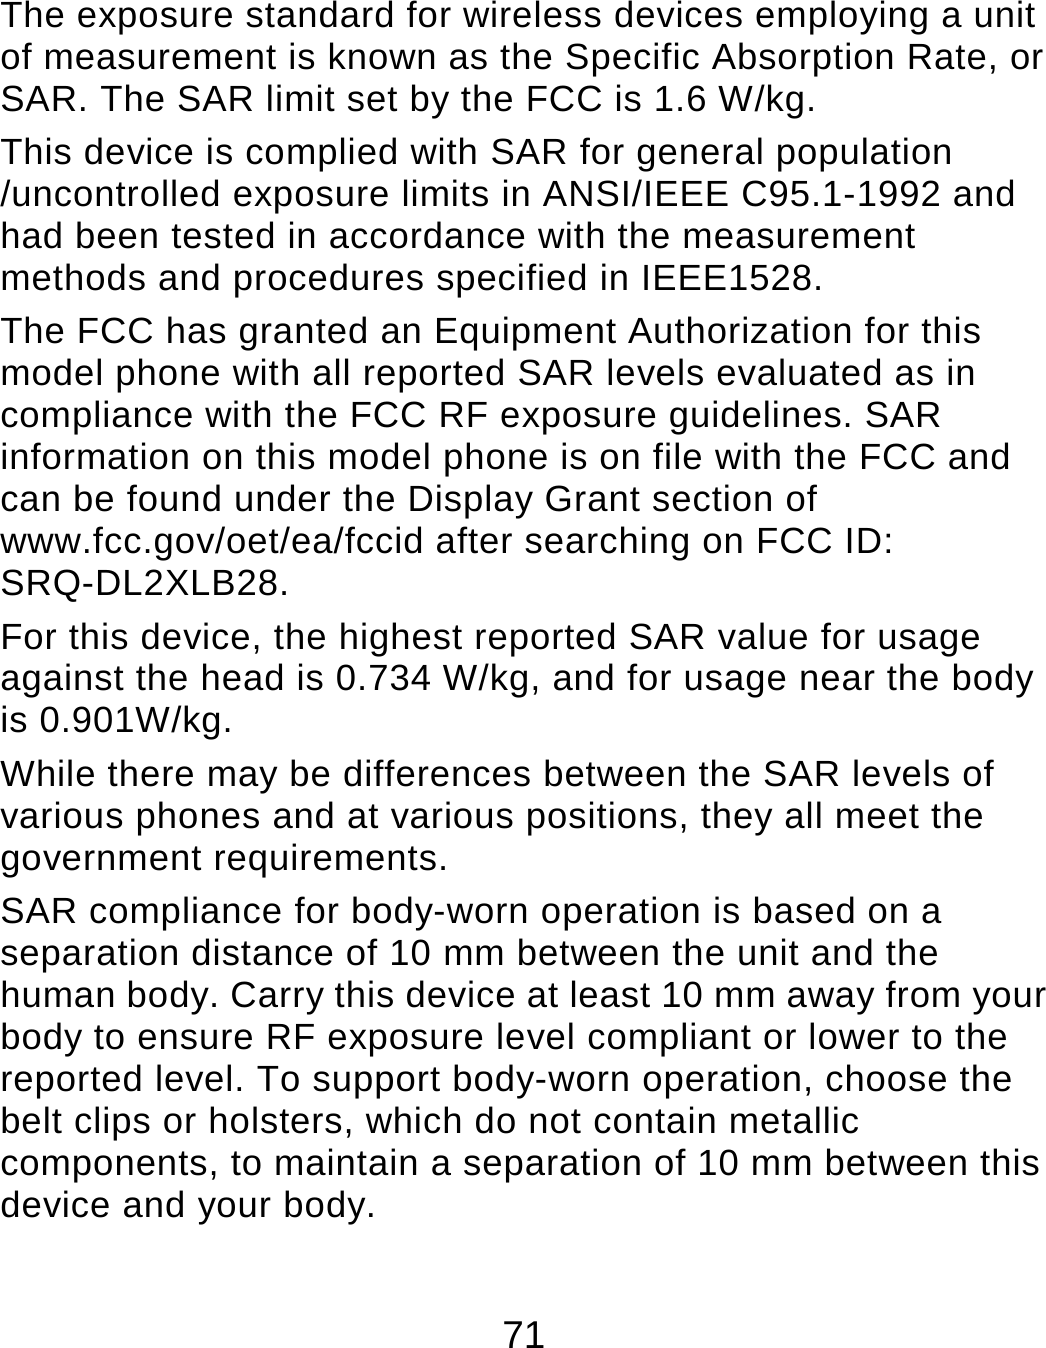 71 The exposure standard for wireless devices employing a unit of measurement is known as the Specific Absorption Rate, or SAR. The SAR limit set by the FCC is 1.6 W/kg.     This device is complied with SAR for general population /uncontrolled exposure limits in ANSI/IEEE C95.1-1992 and had been tested in accordance with the measurement methods and procedures specified in IEEE1528. The FCC has granted an Equipment Authorization for this model phone with all reported SAR levels evaluated as in compliance with the FCC RF exposure guidelines. SAR information on this model phone is on file with the FCC and can be found under the Display Grant section of www.fcc.gov/oet/ea/fccid after searching on FCC ID: SRQ-DL2XLB28. For this device, the highest reported SAR value for usage against the head is 0.734 W/kg, and for usage near the body is 0.901W/kg. While there may be differences between the SAR levels of various phones and at various positions, they all meet the government requirements. SAR compliance for body-worn operation is based on a separation distance of 10 mm between the unit and the human body. Carry this device at least 10 mm away from your body to ensure RF exposure level compliant or lower to the reported level. To support body-worn operation, choose the belt clips or holsters, which do not contain metallic components, to maintain a separation of 10 mm between this device and your body.   